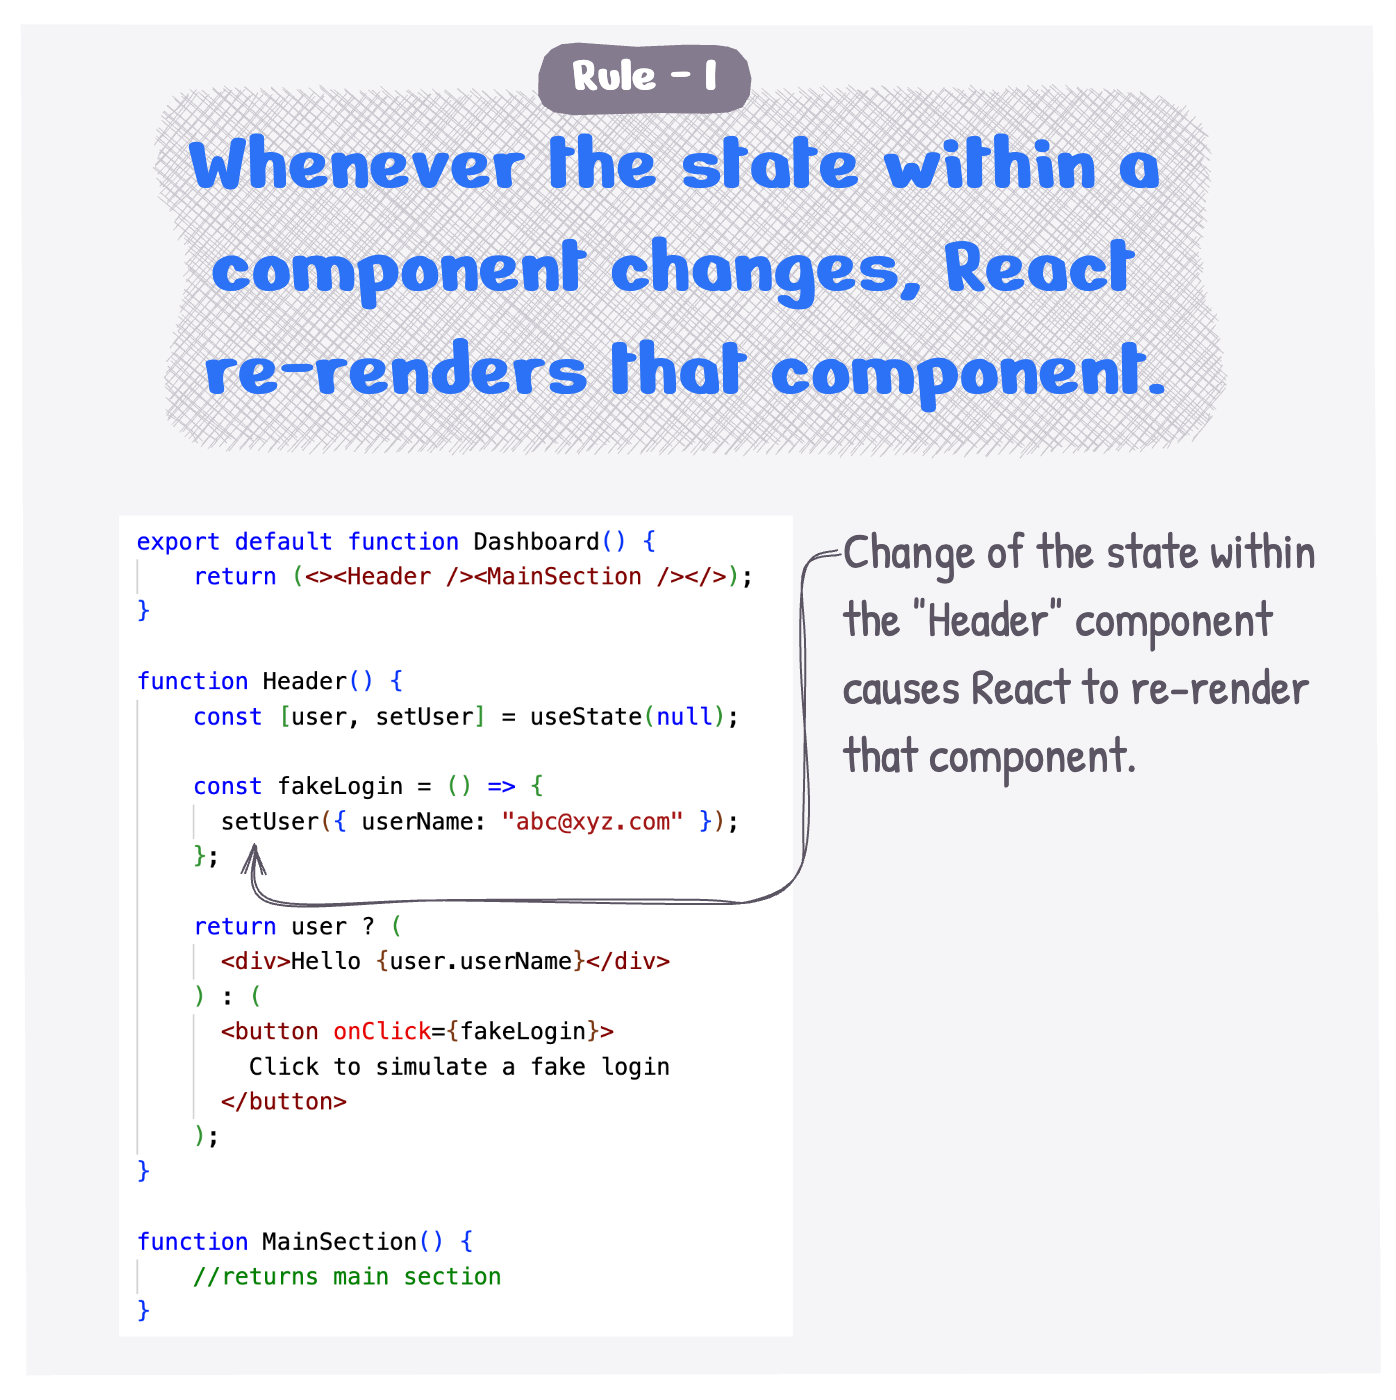 Whenever the state within a component changes, React re-renders that component.